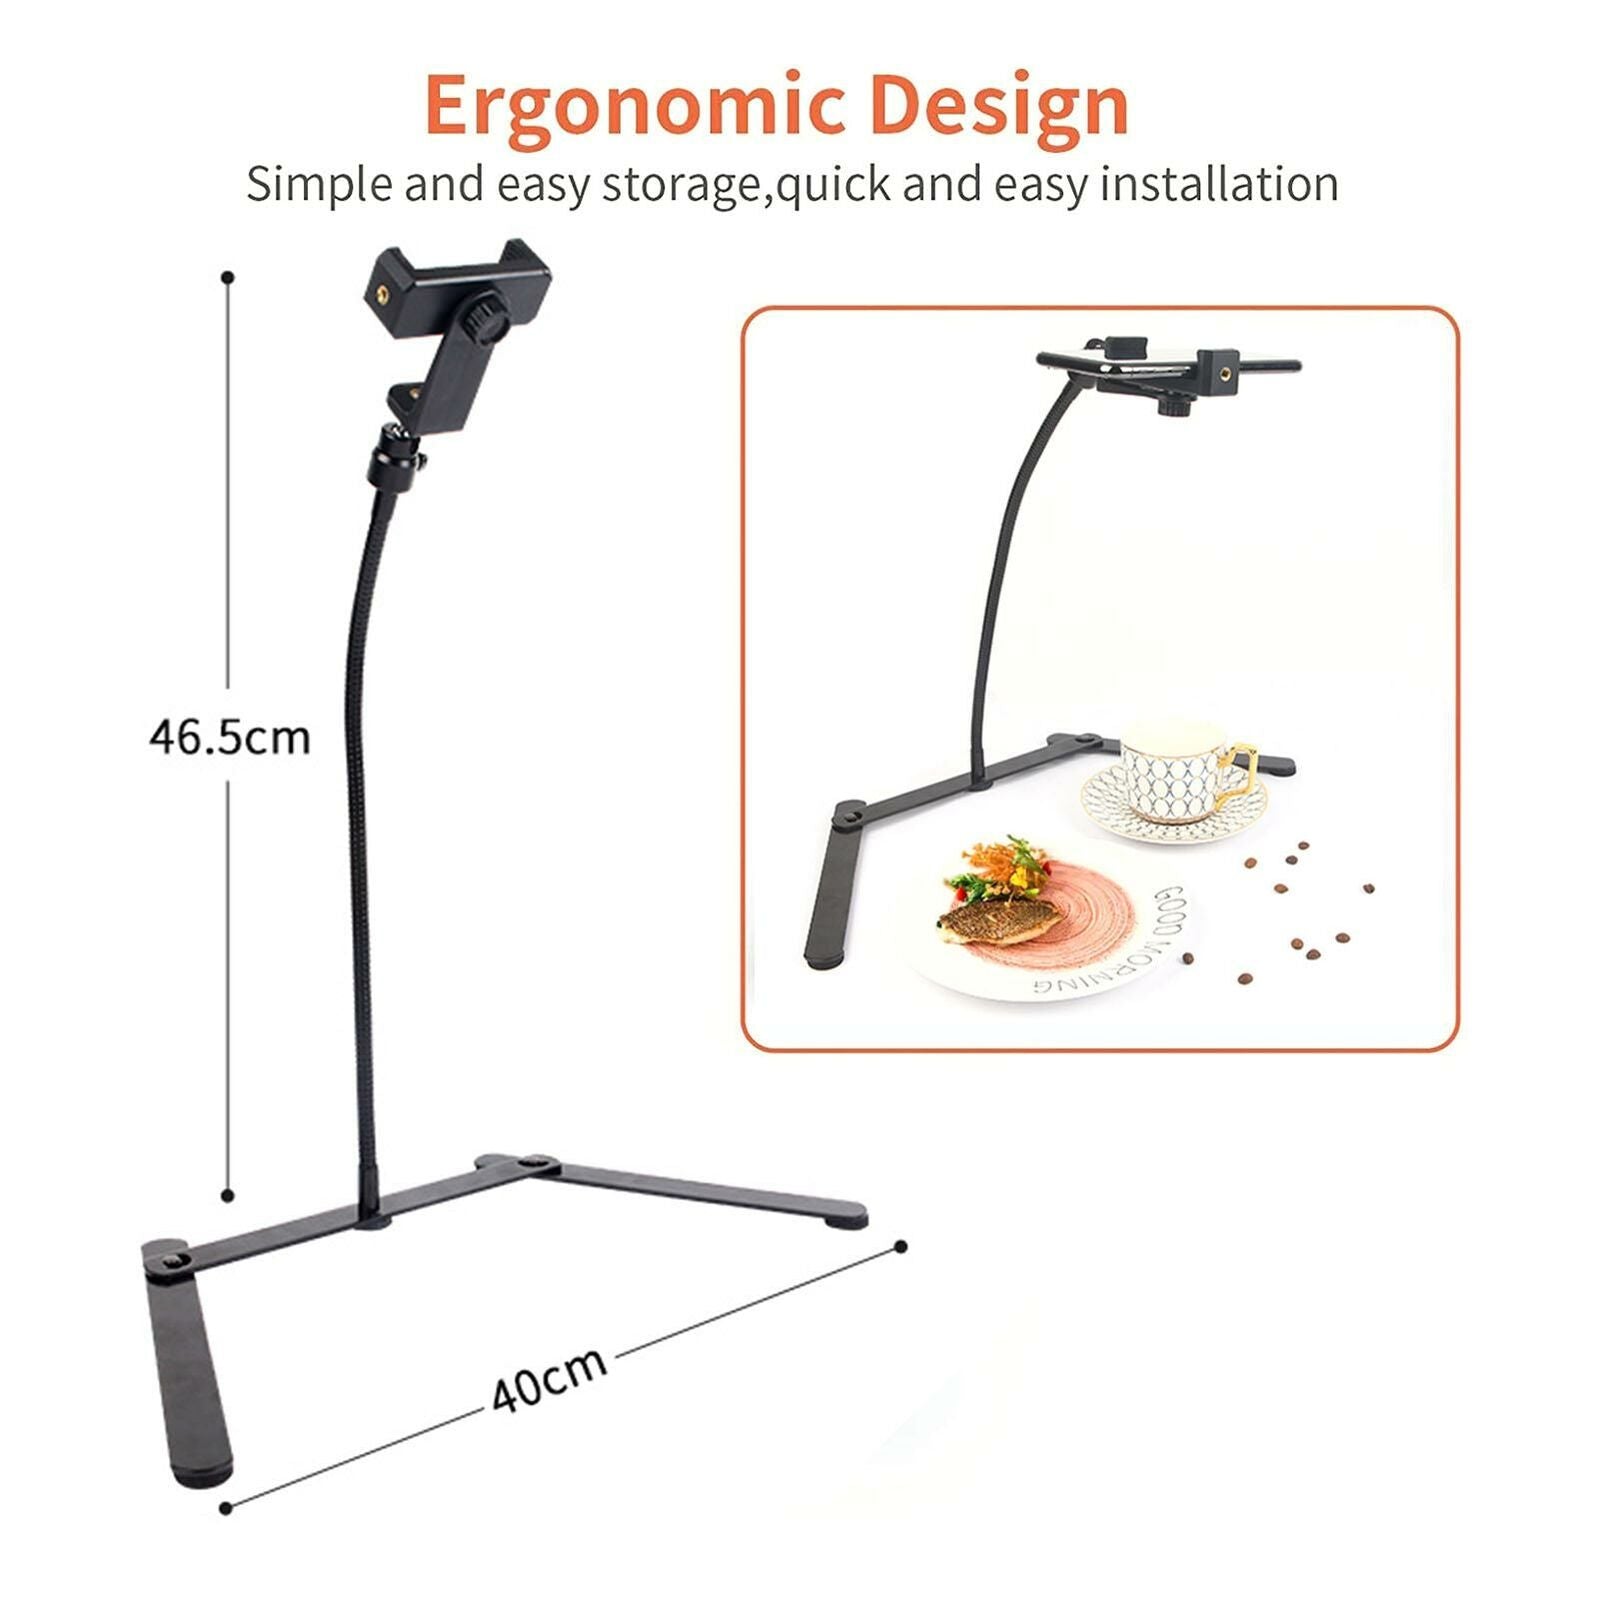 Phone Stand Tripod With Holder Overhead Stand For Live Streaming Teaching Online